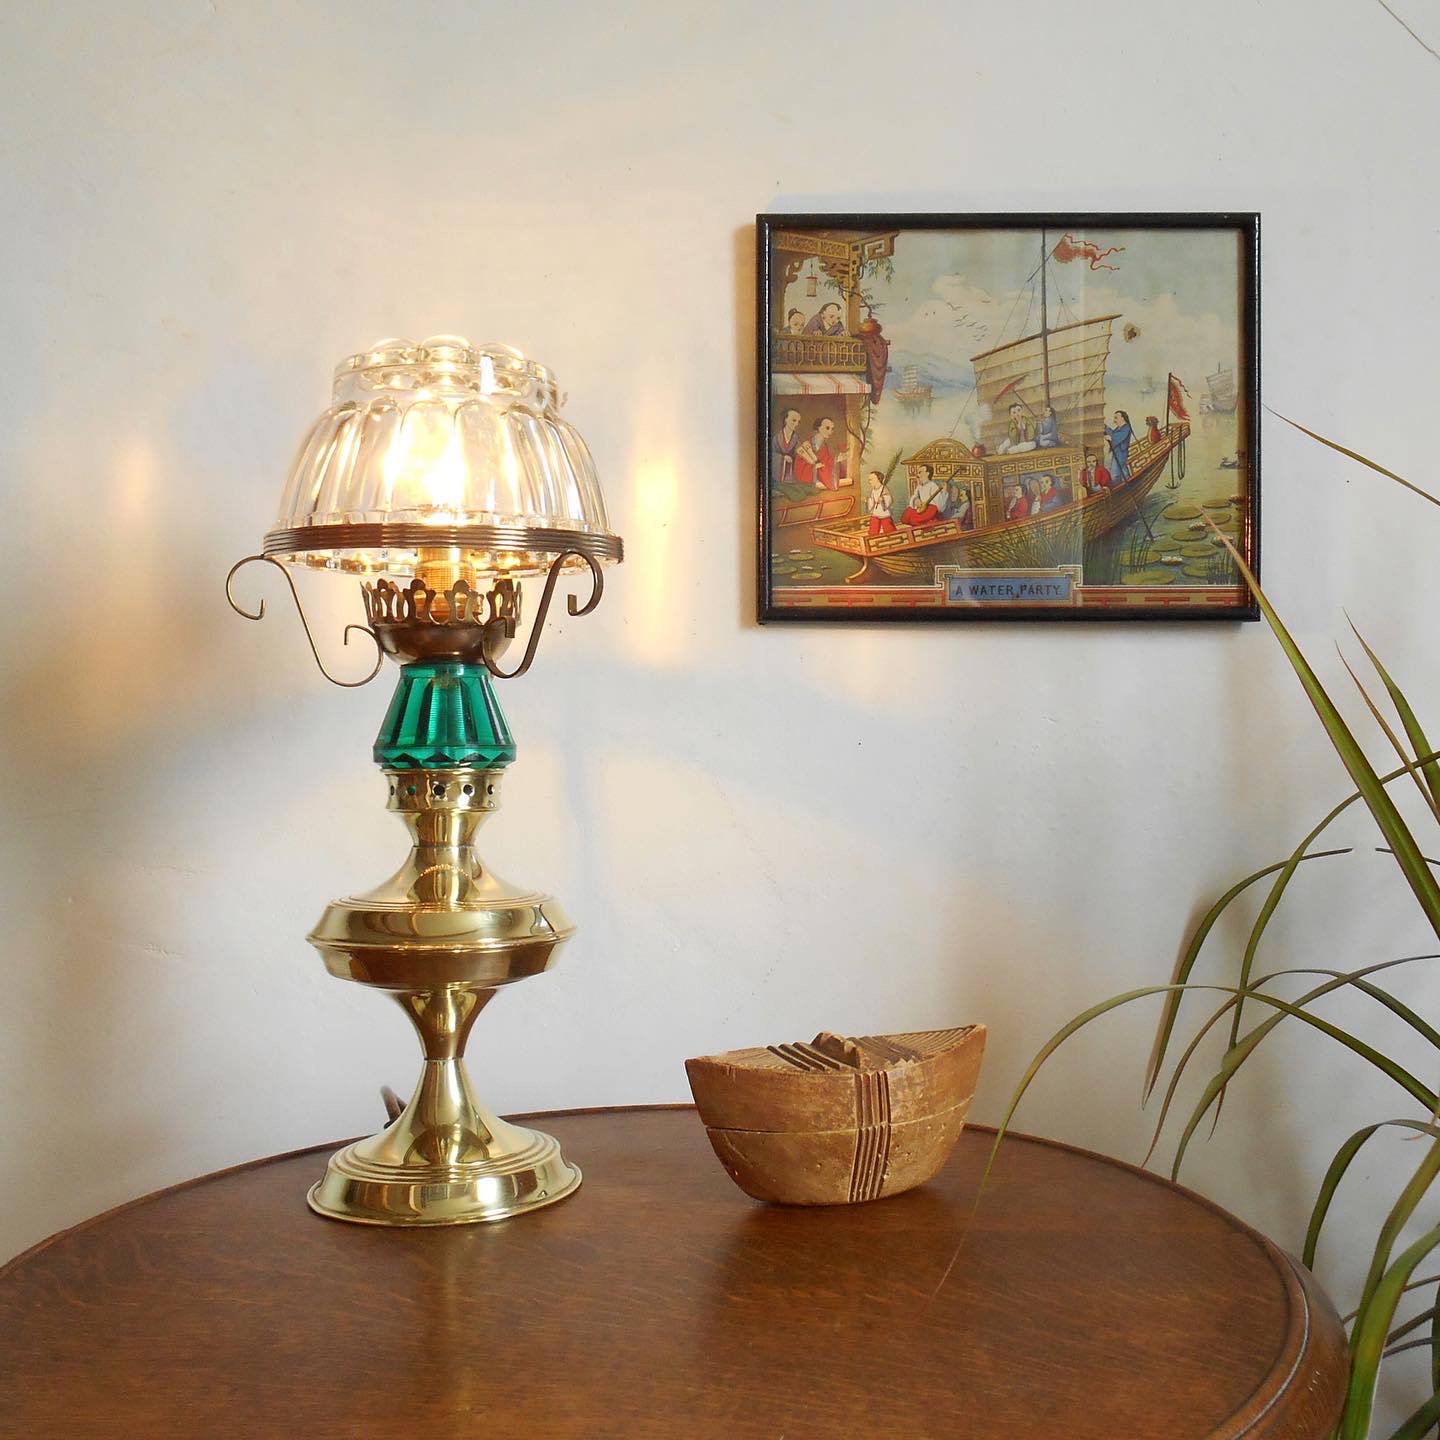 A vintage brass table lamp with a glass jelly mould shade